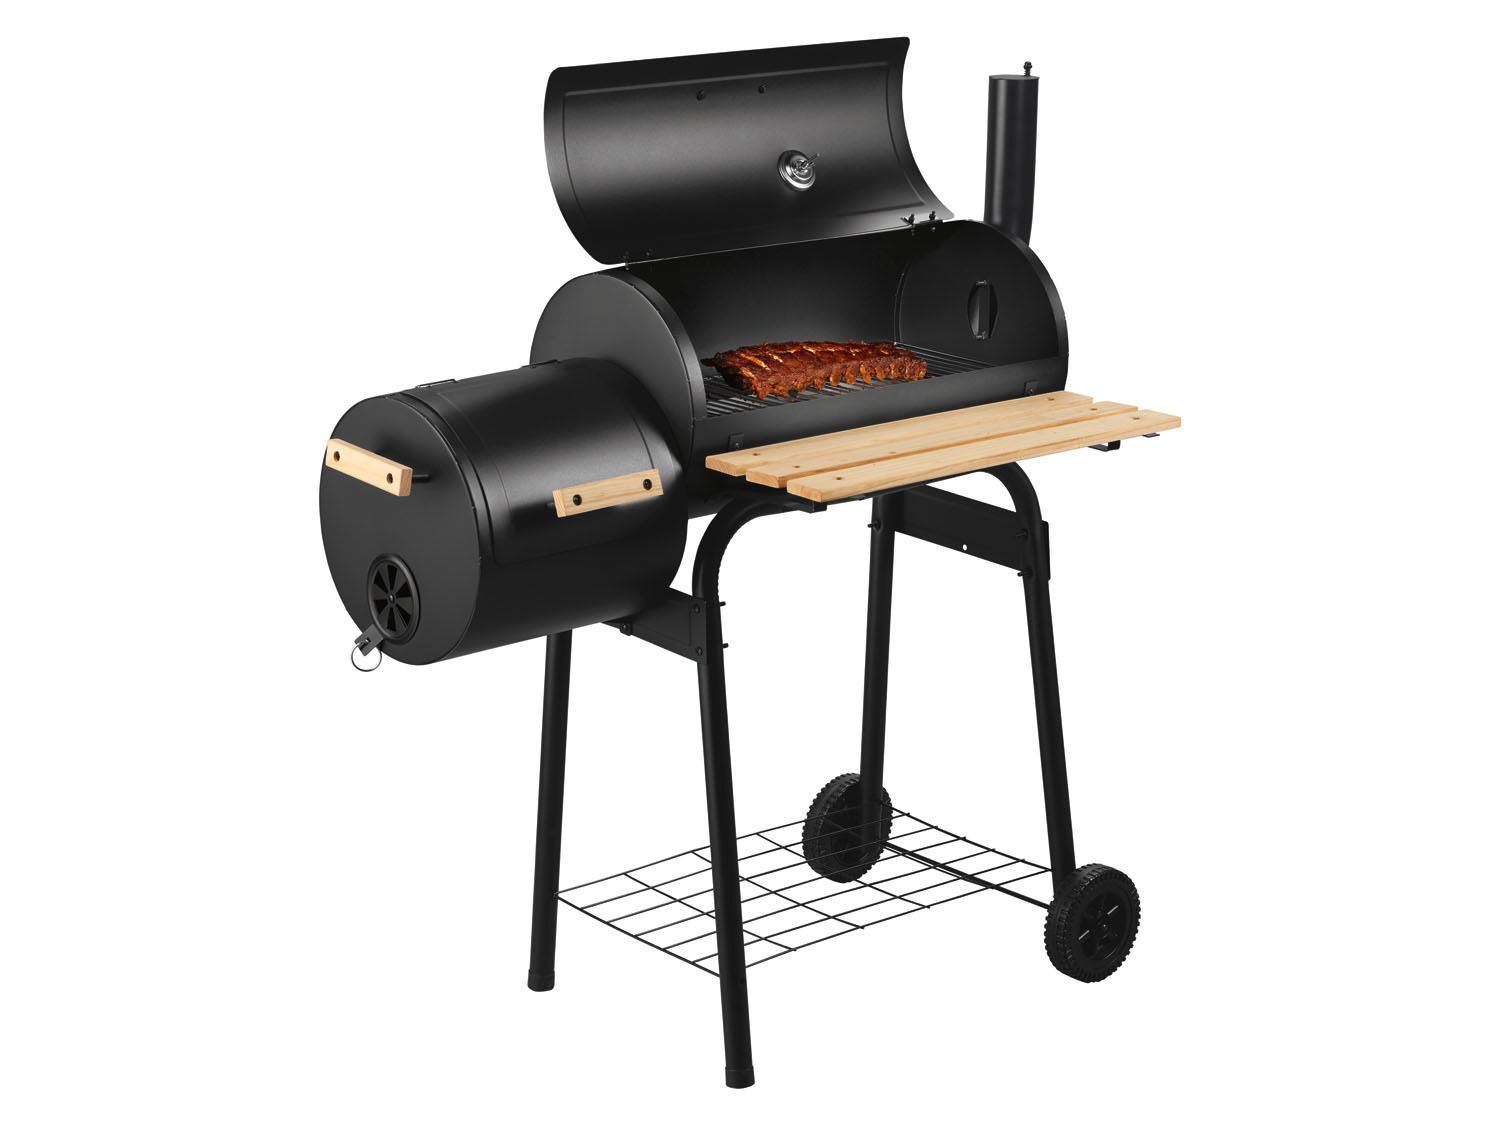 GRILLMEISTER Holzkohle-Smokergrill »GMS 92 mit A1«, se…